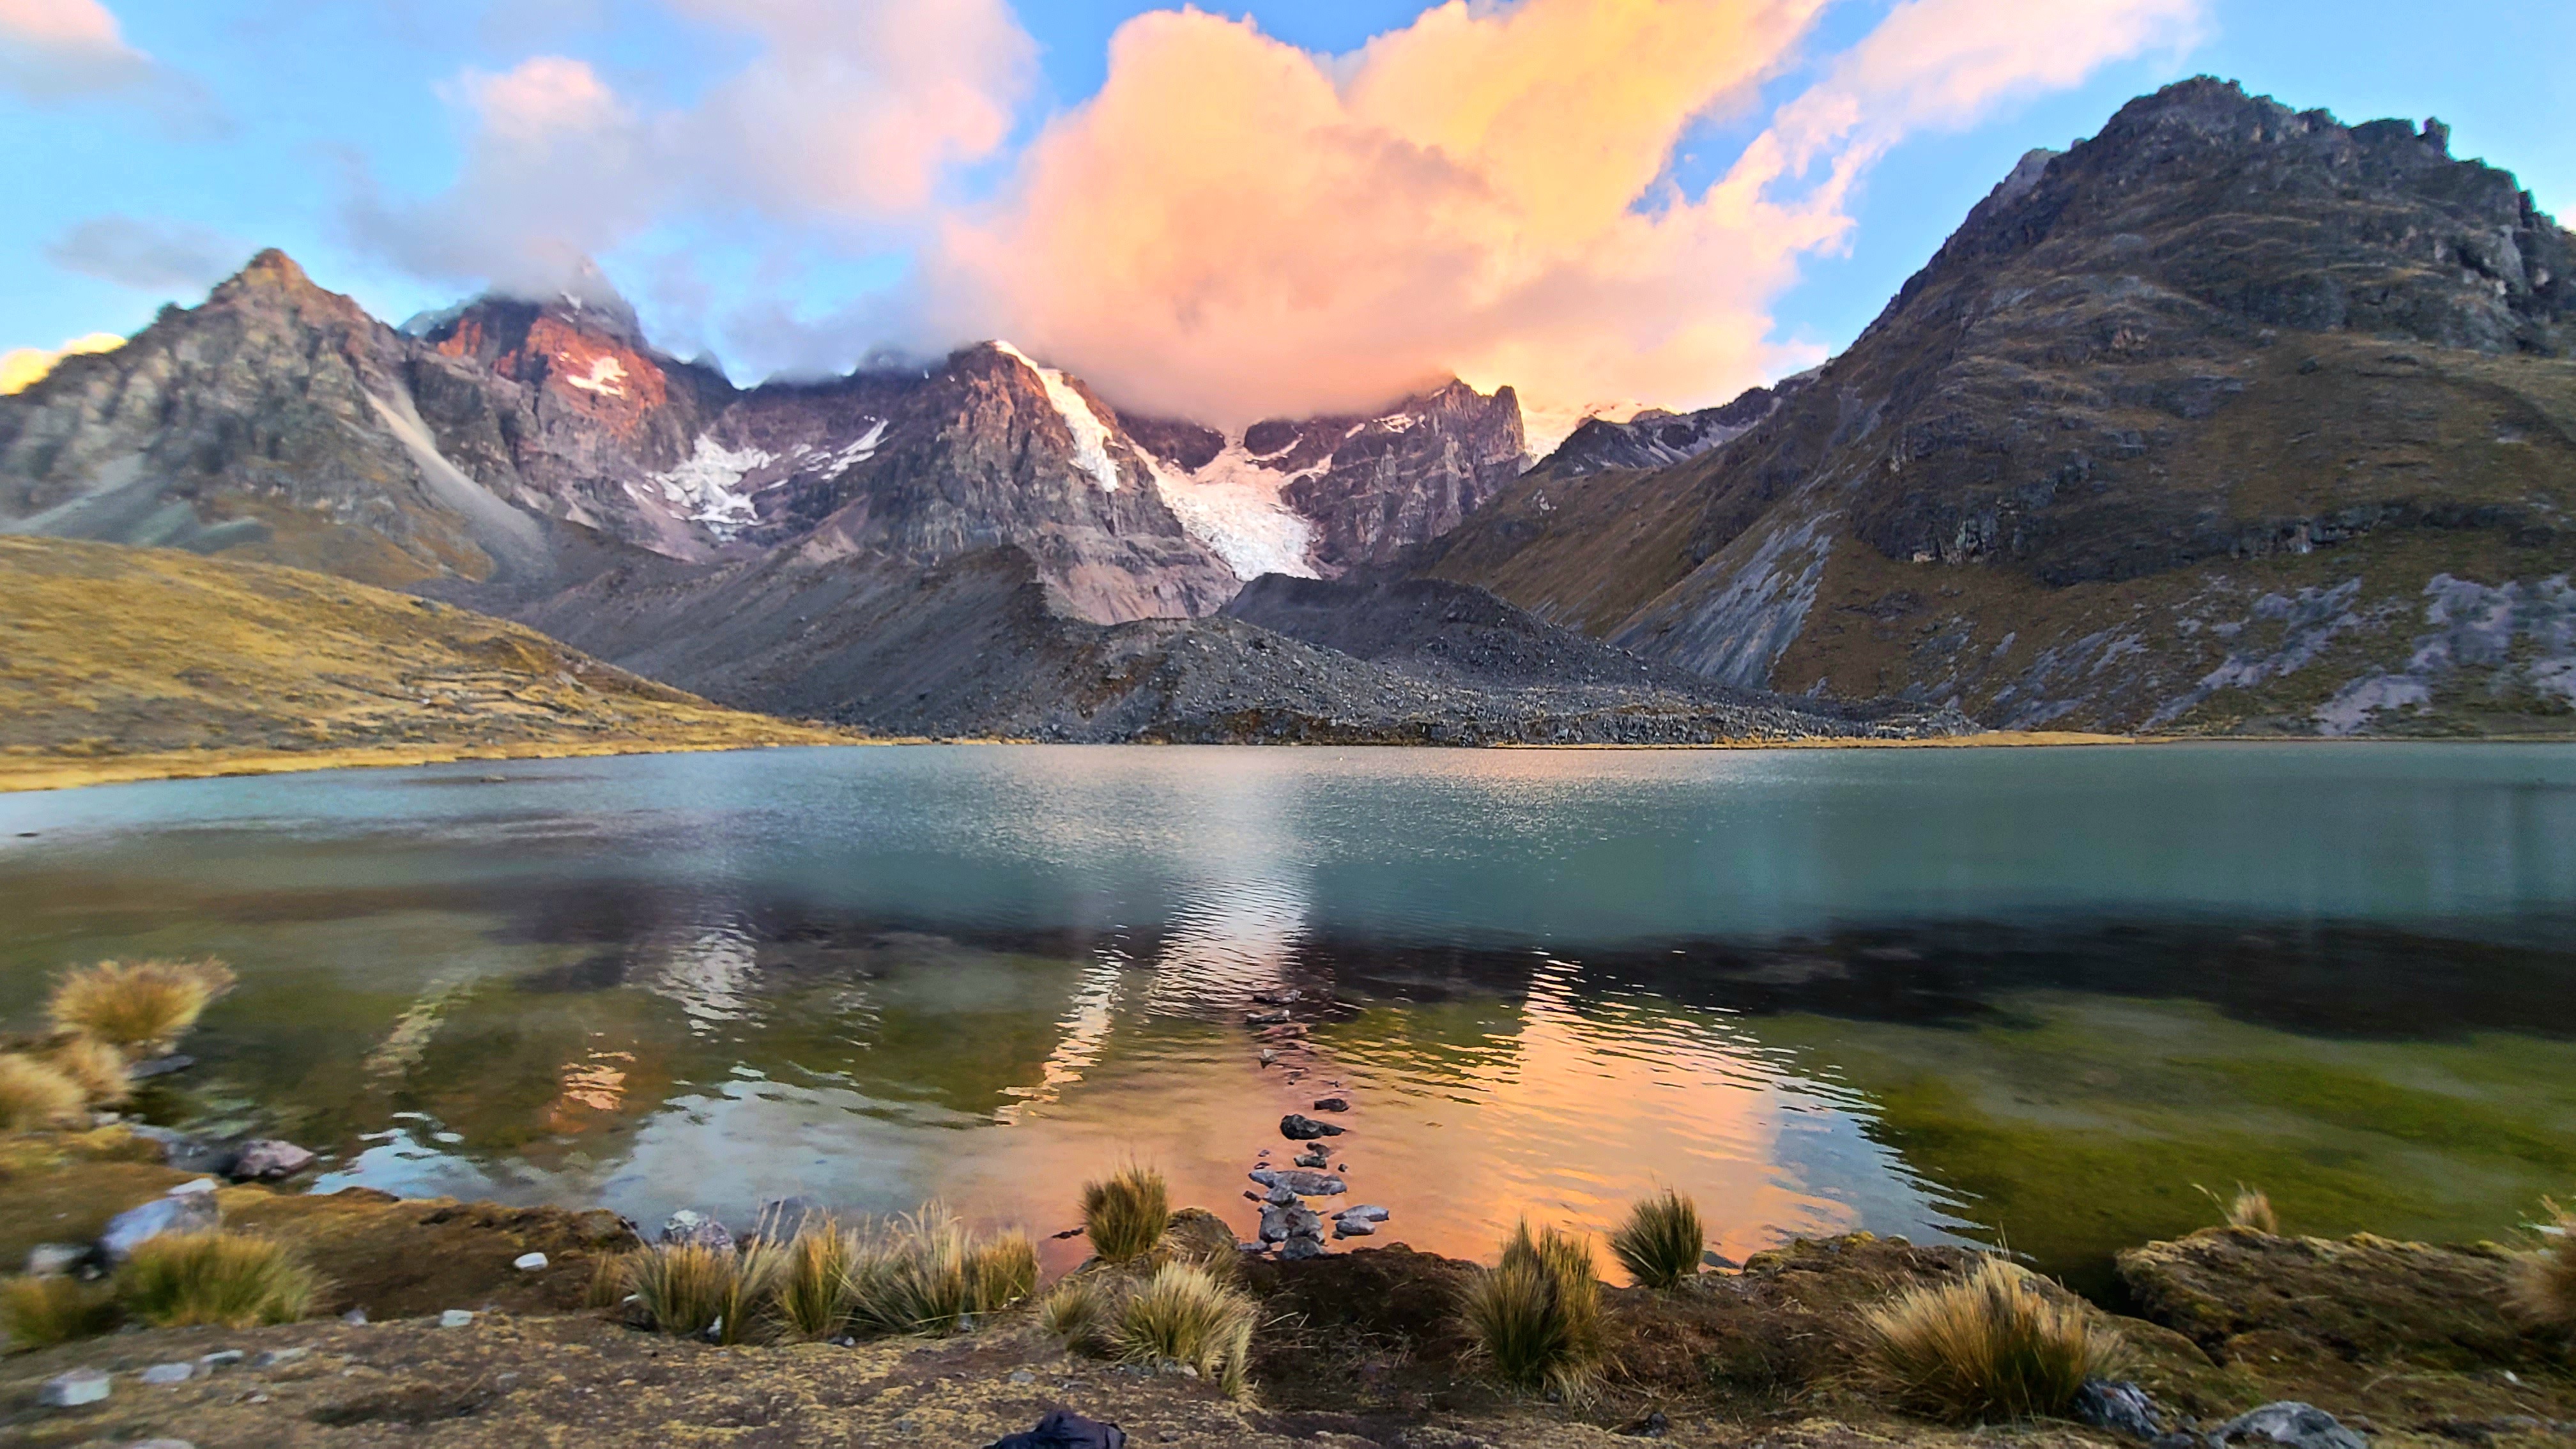   2nd Place: Katie Foster  Mama Qocha, Tayta Urqu: a snow-capped mountain is reflected in an alpine lagoon in the southern Andes of Peru at sunset. Glacial meltwater is the primary source of drinking water in the Andes, especially during the dry season. Lakes and mountains are respected and revered across the region.